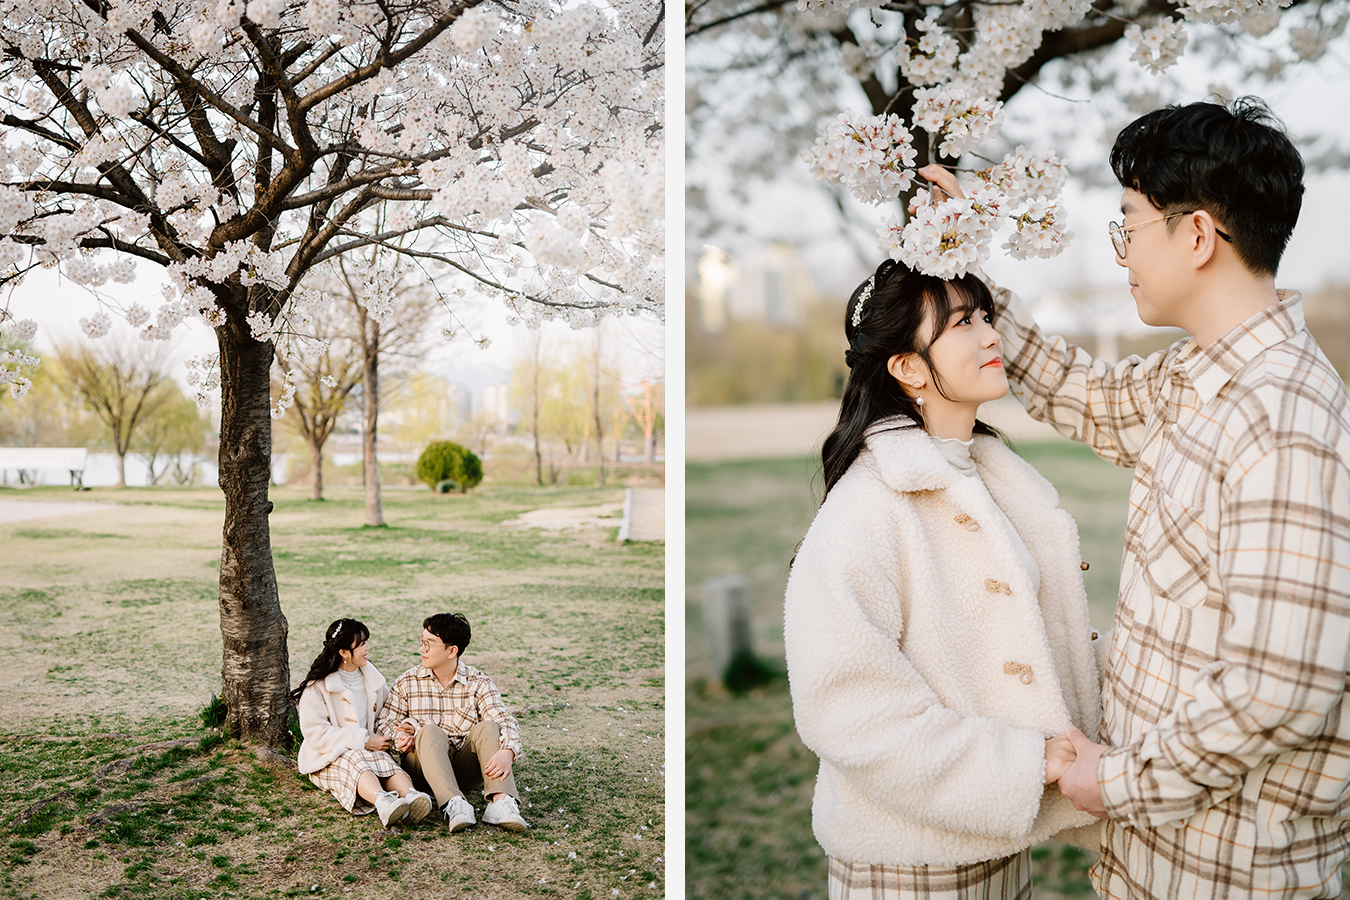 Cute Korea Pre-Wedding Photoshoot Under the Cherry Blossoms Trees by Jungyeol on OneThreeOneFour 16